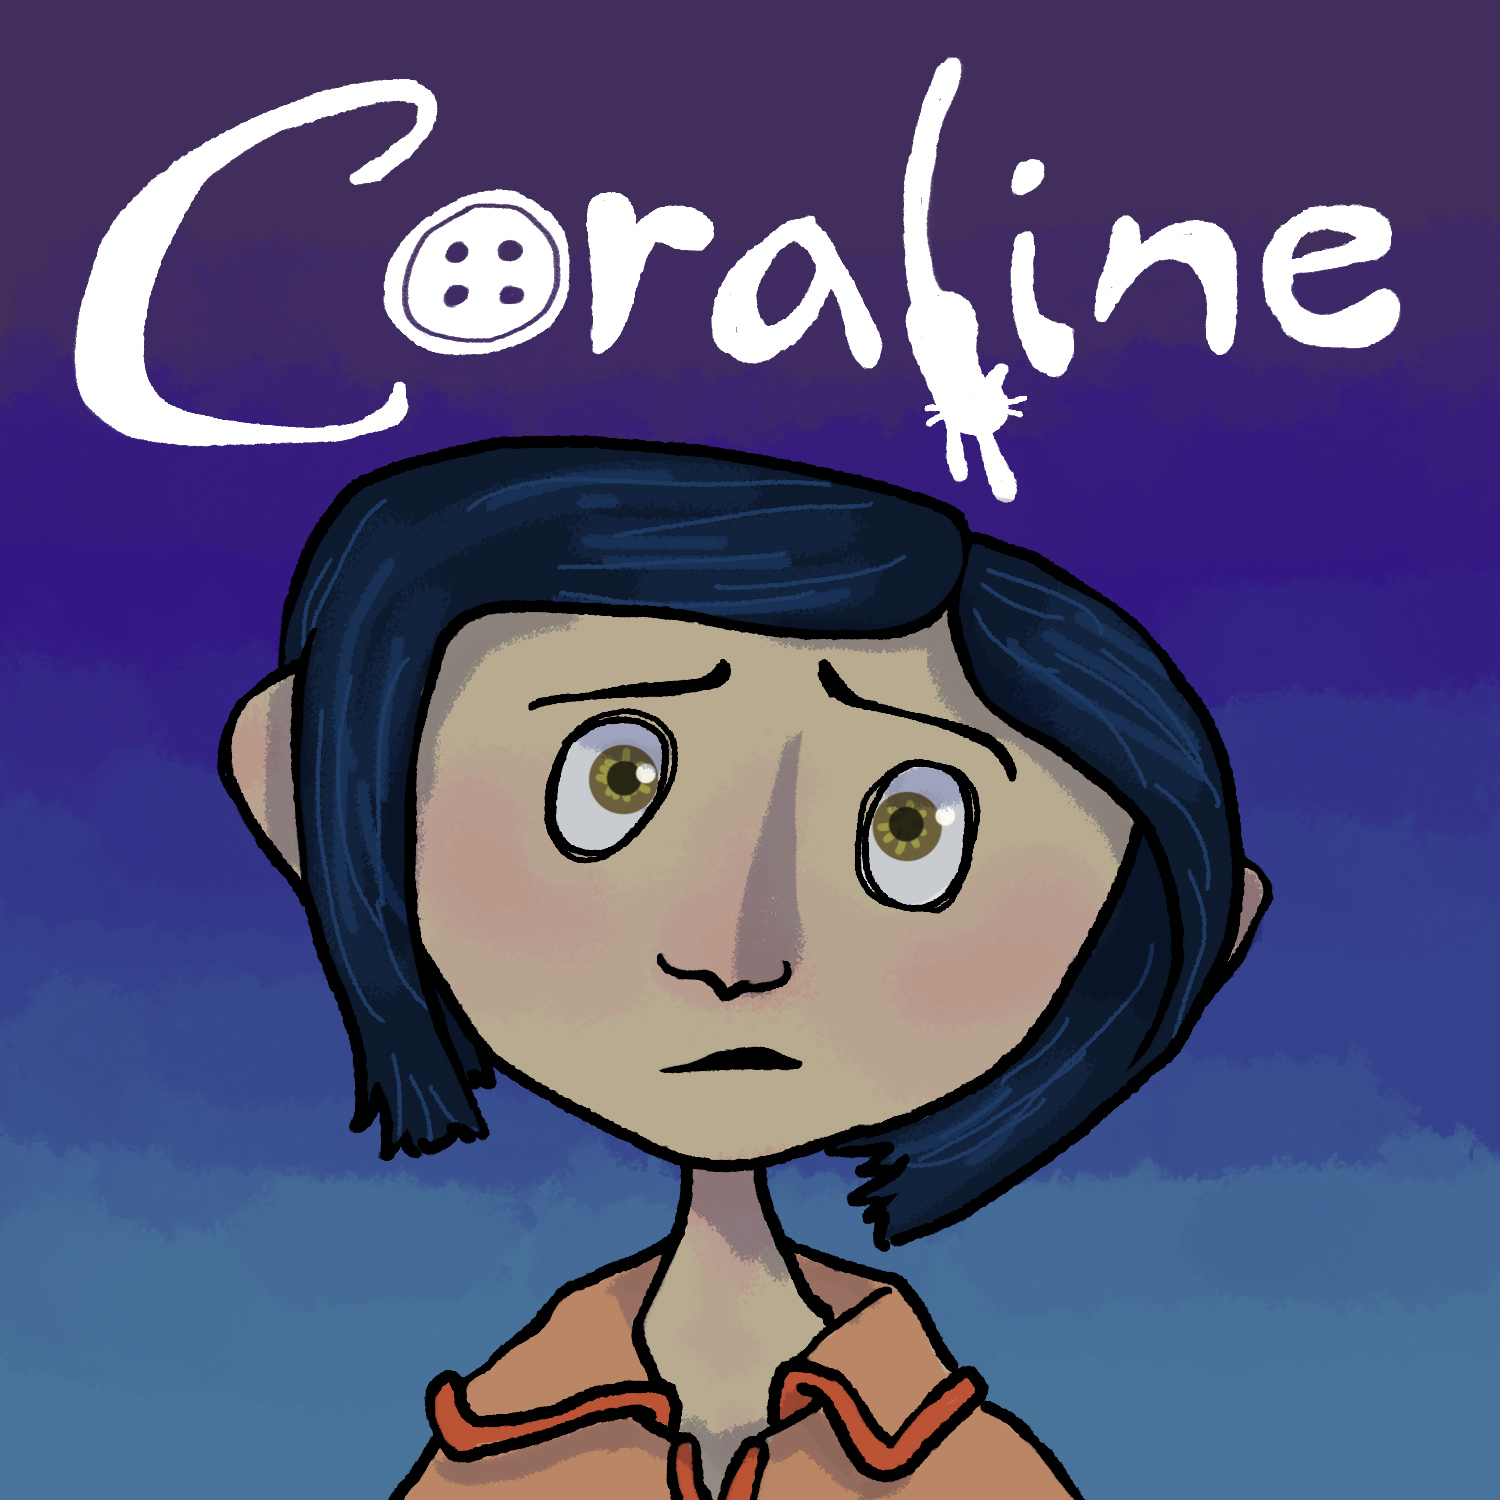 What Makes Coraline So Scary? A Look Inside the Book and Film